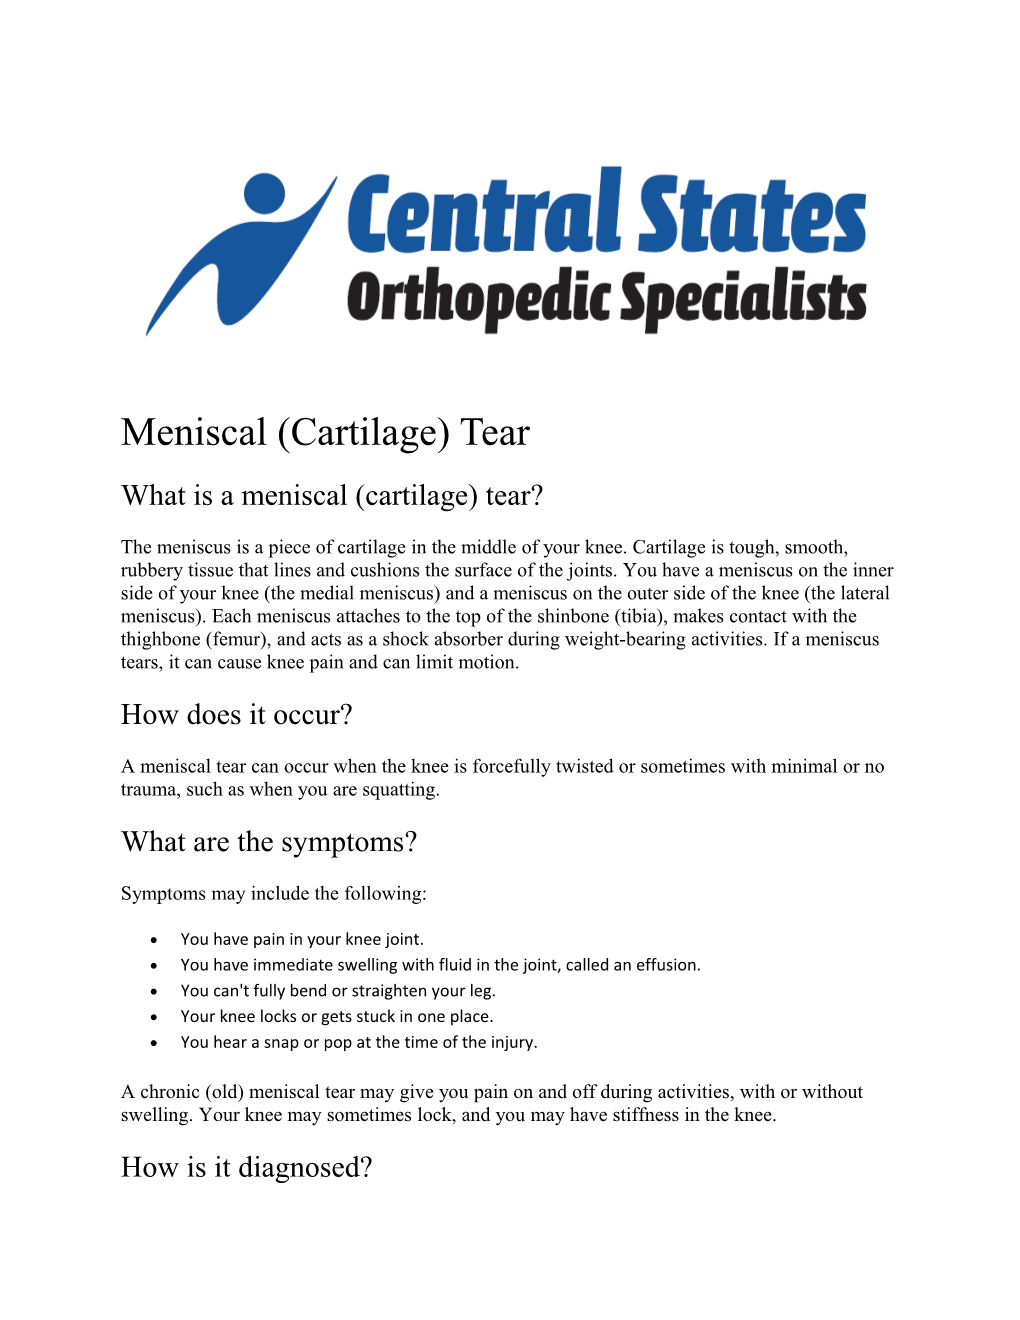 What Is a Meniscal (Cartilage) Tear?